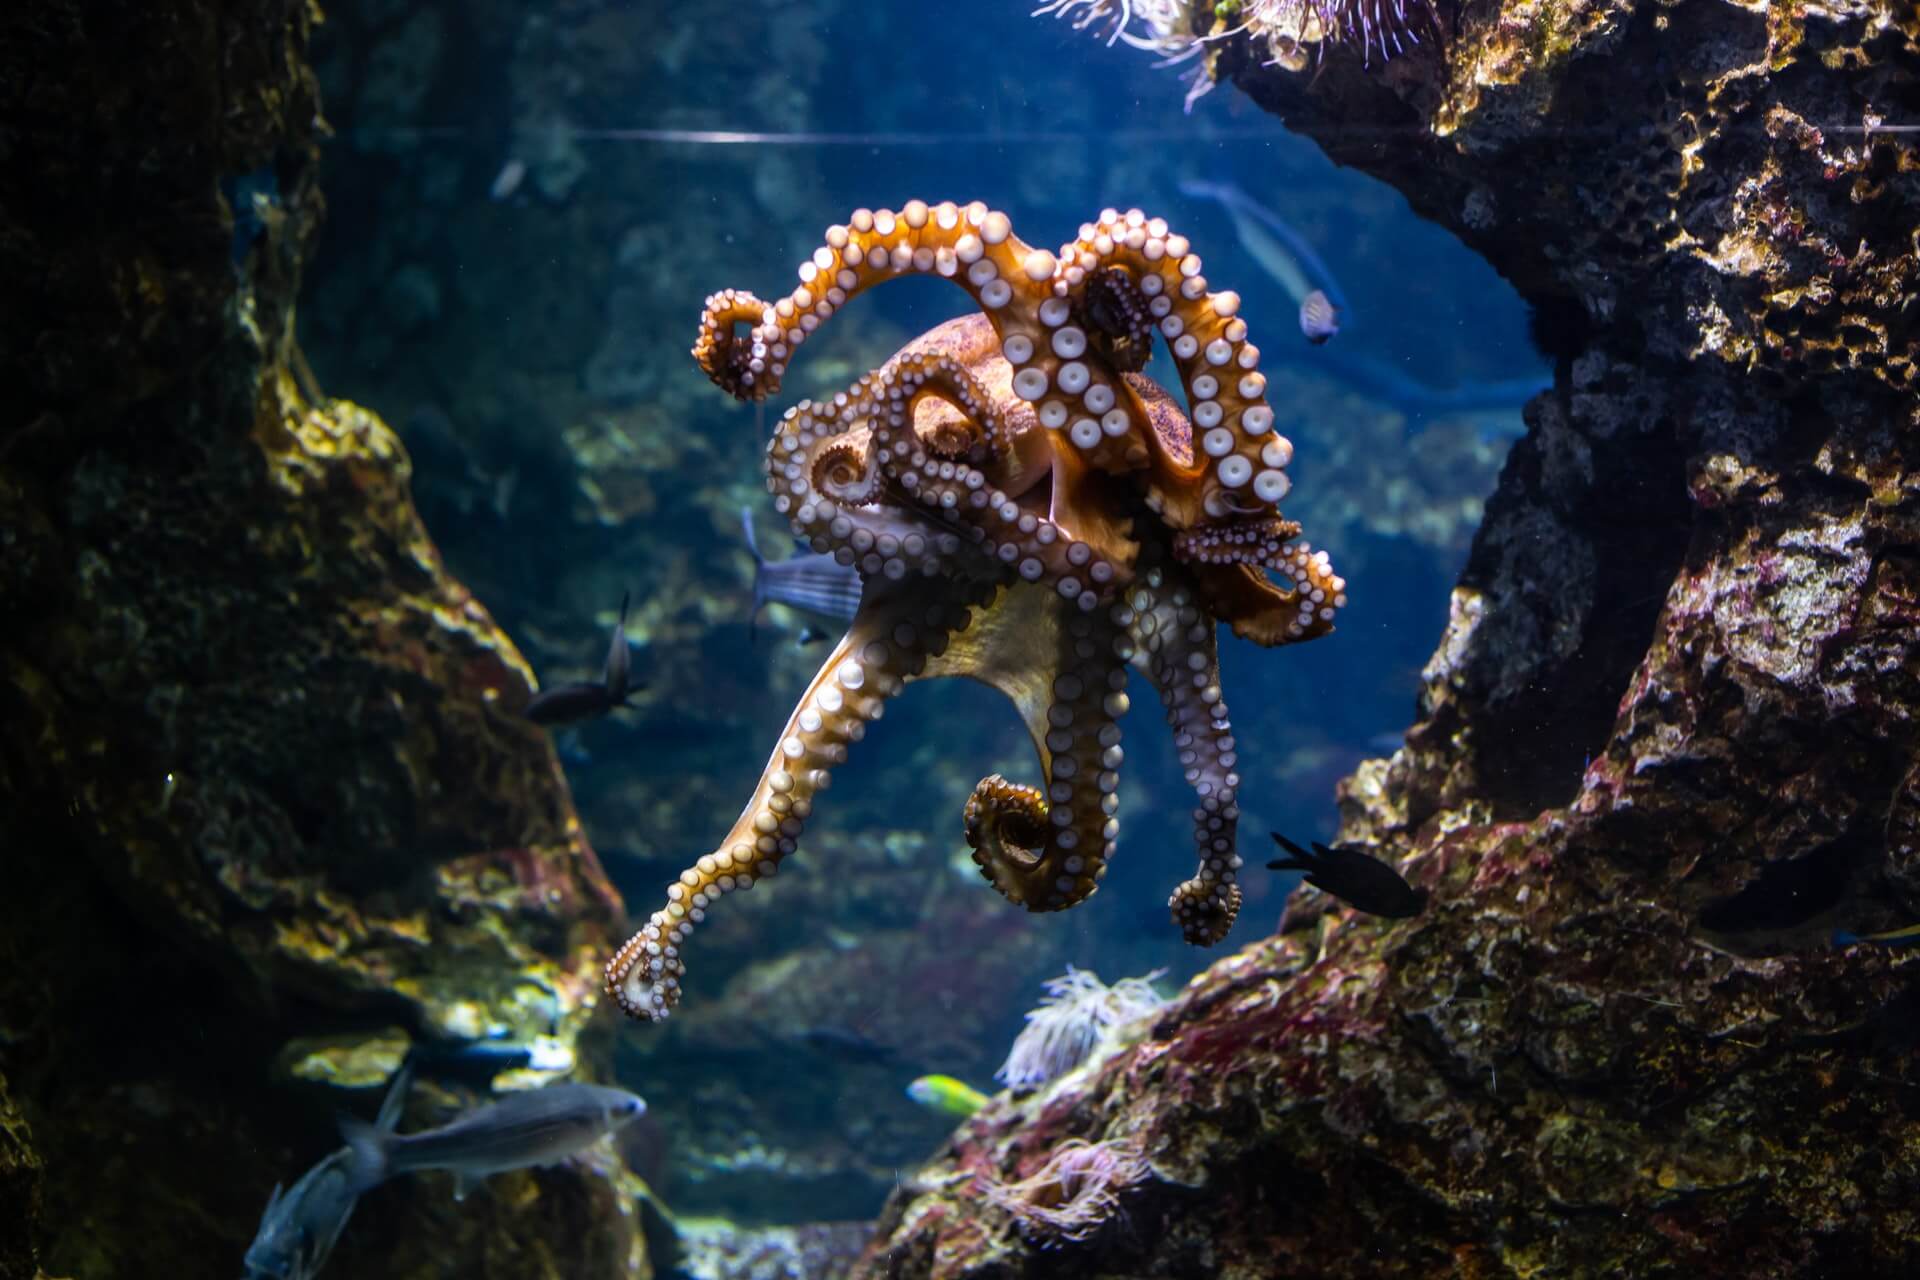 Blue Ringed Octopus Facts for Kids